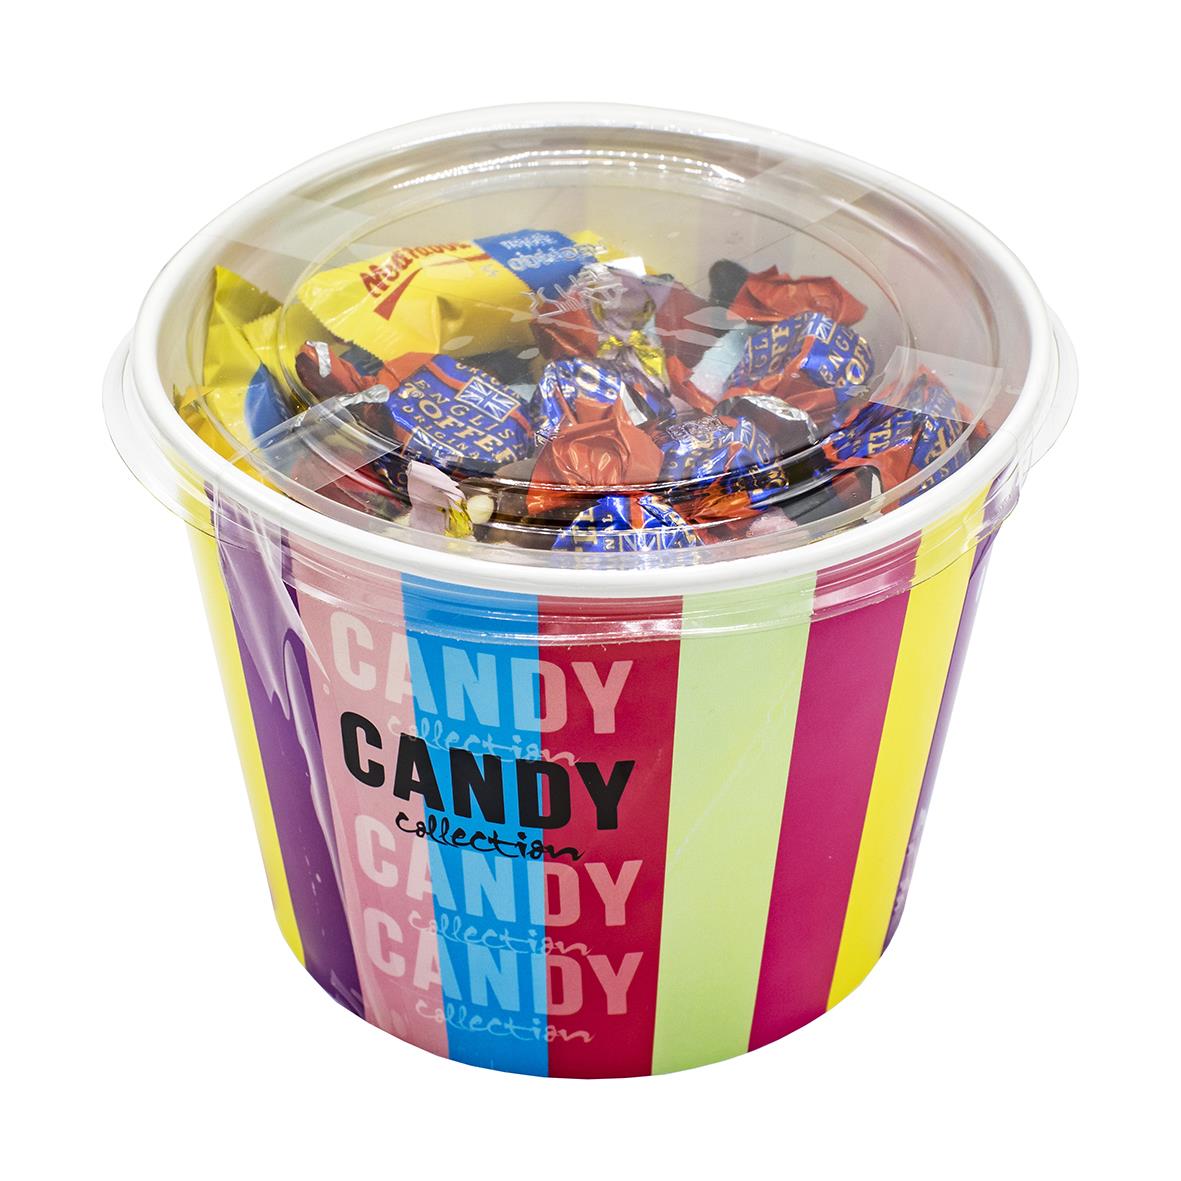 Godis Candy Collection 850g 60010862_1